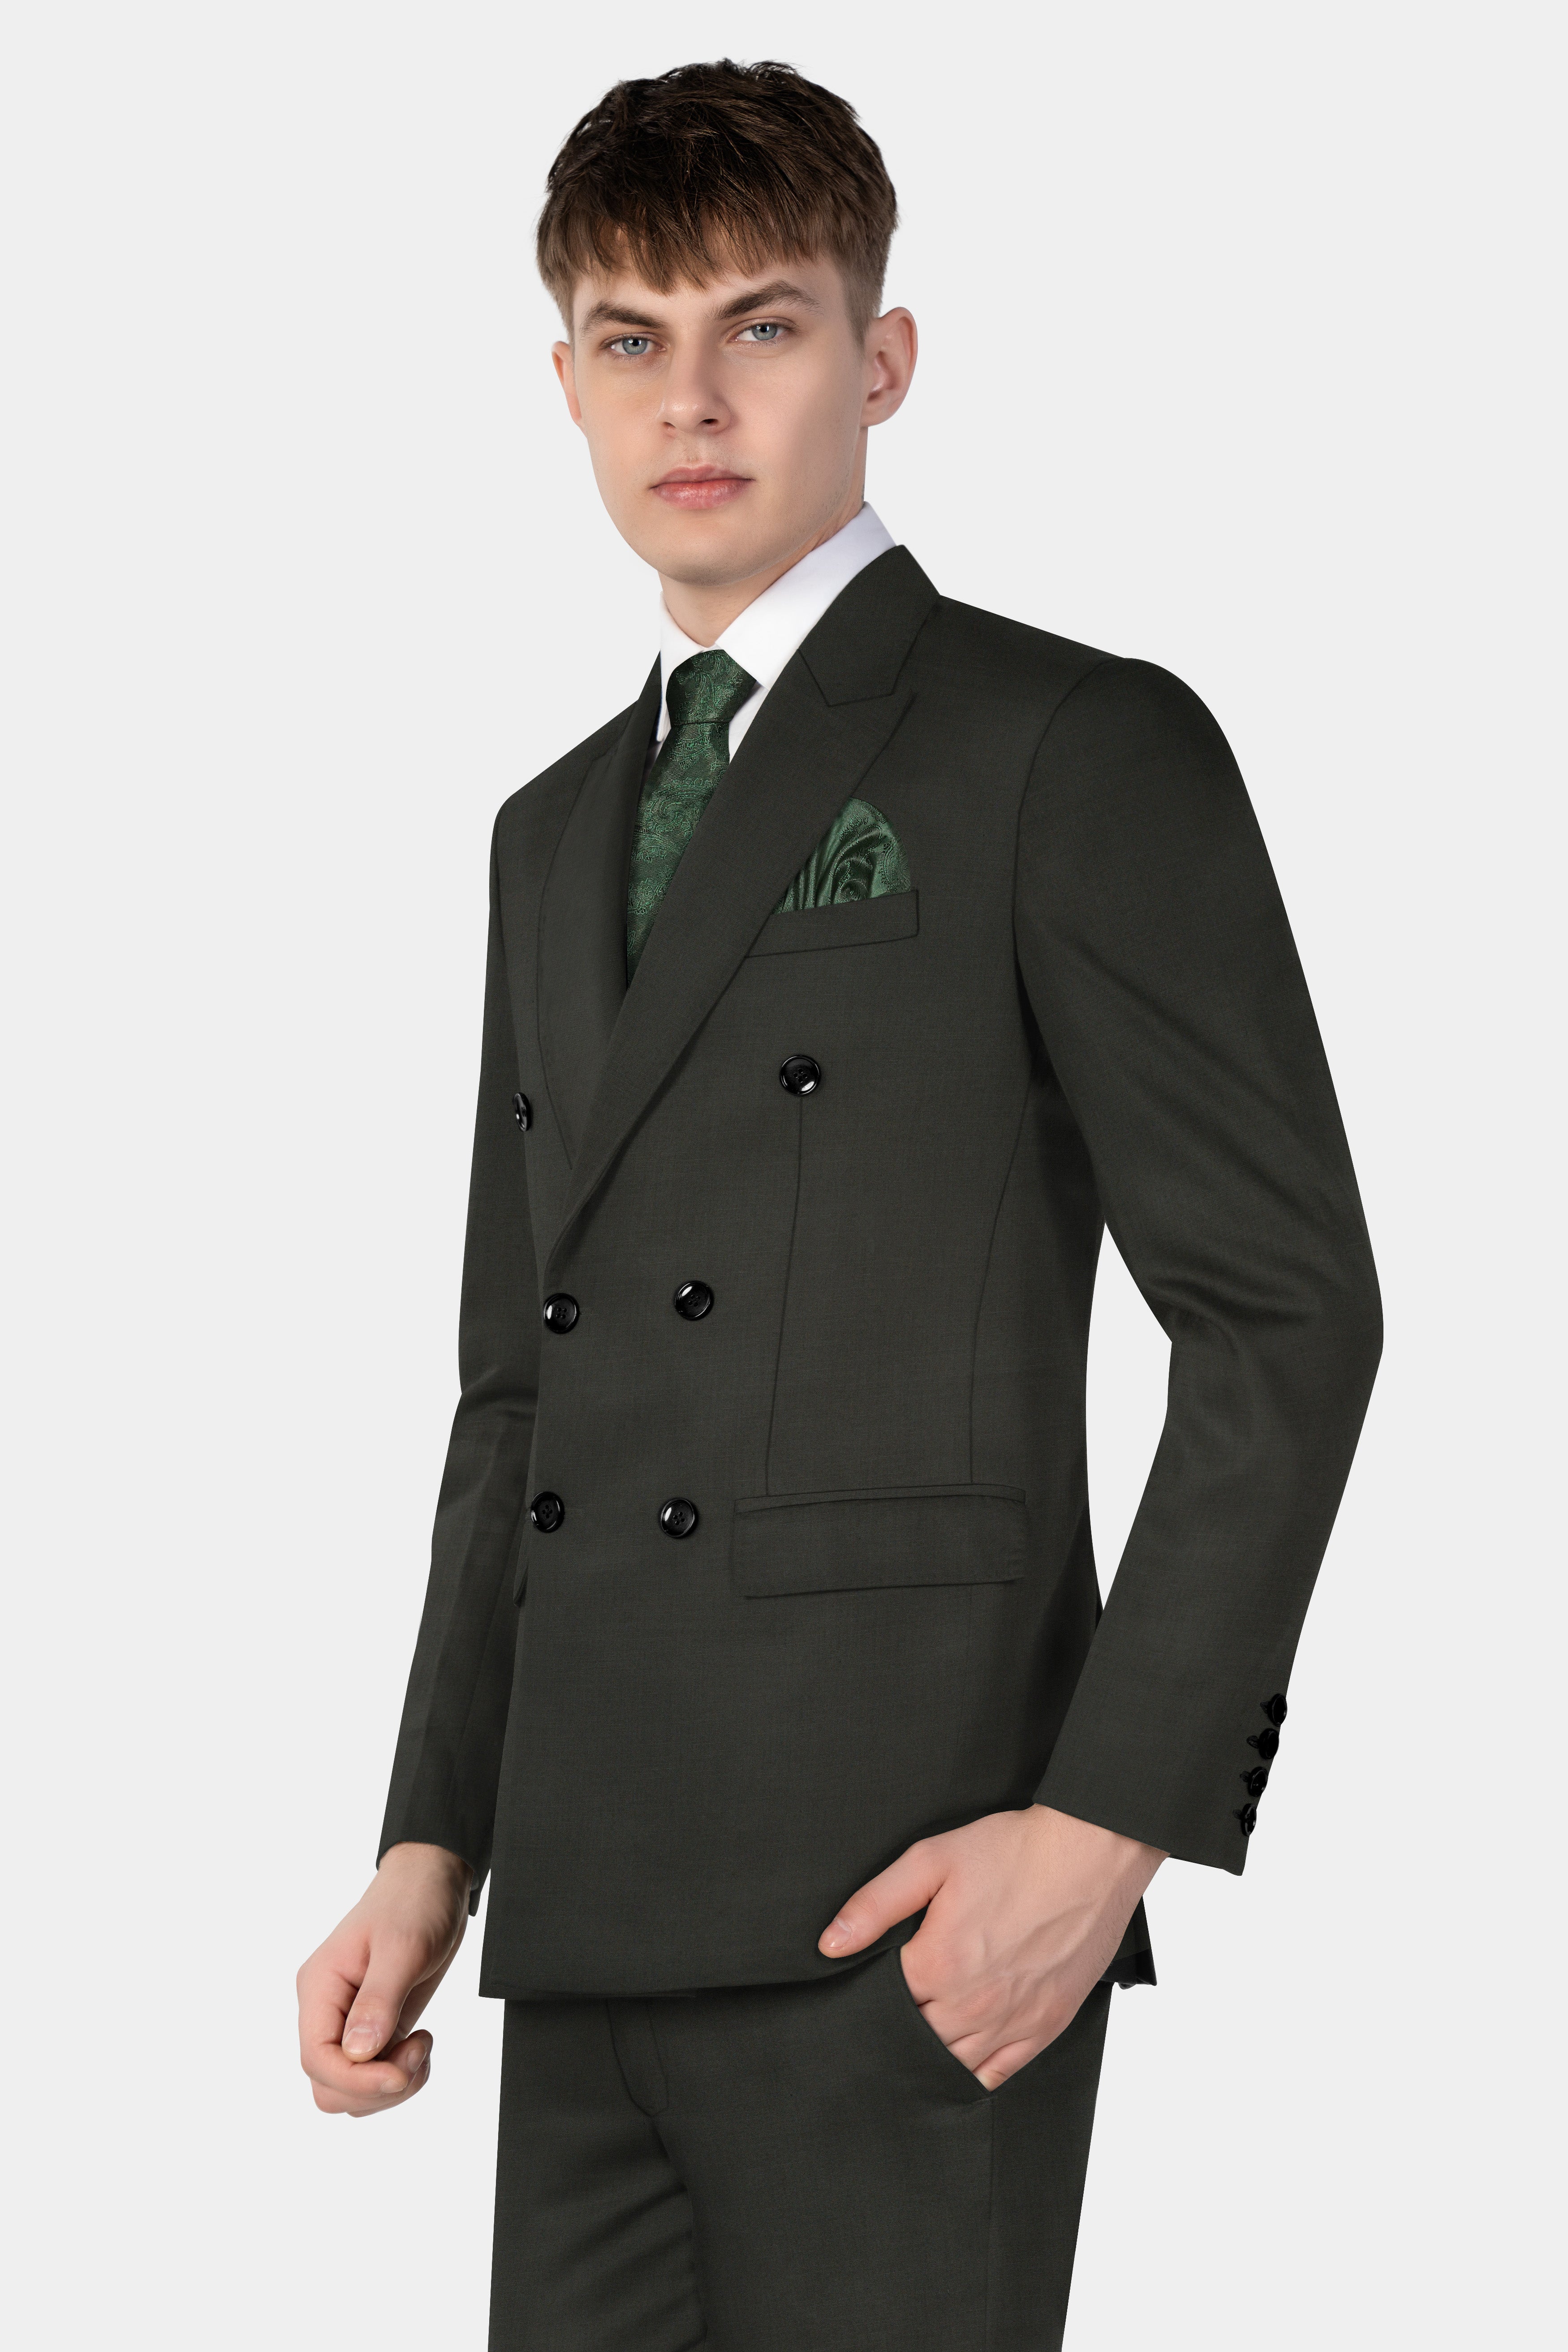 Rangoon Green Wool Blend Double Breasted Suit